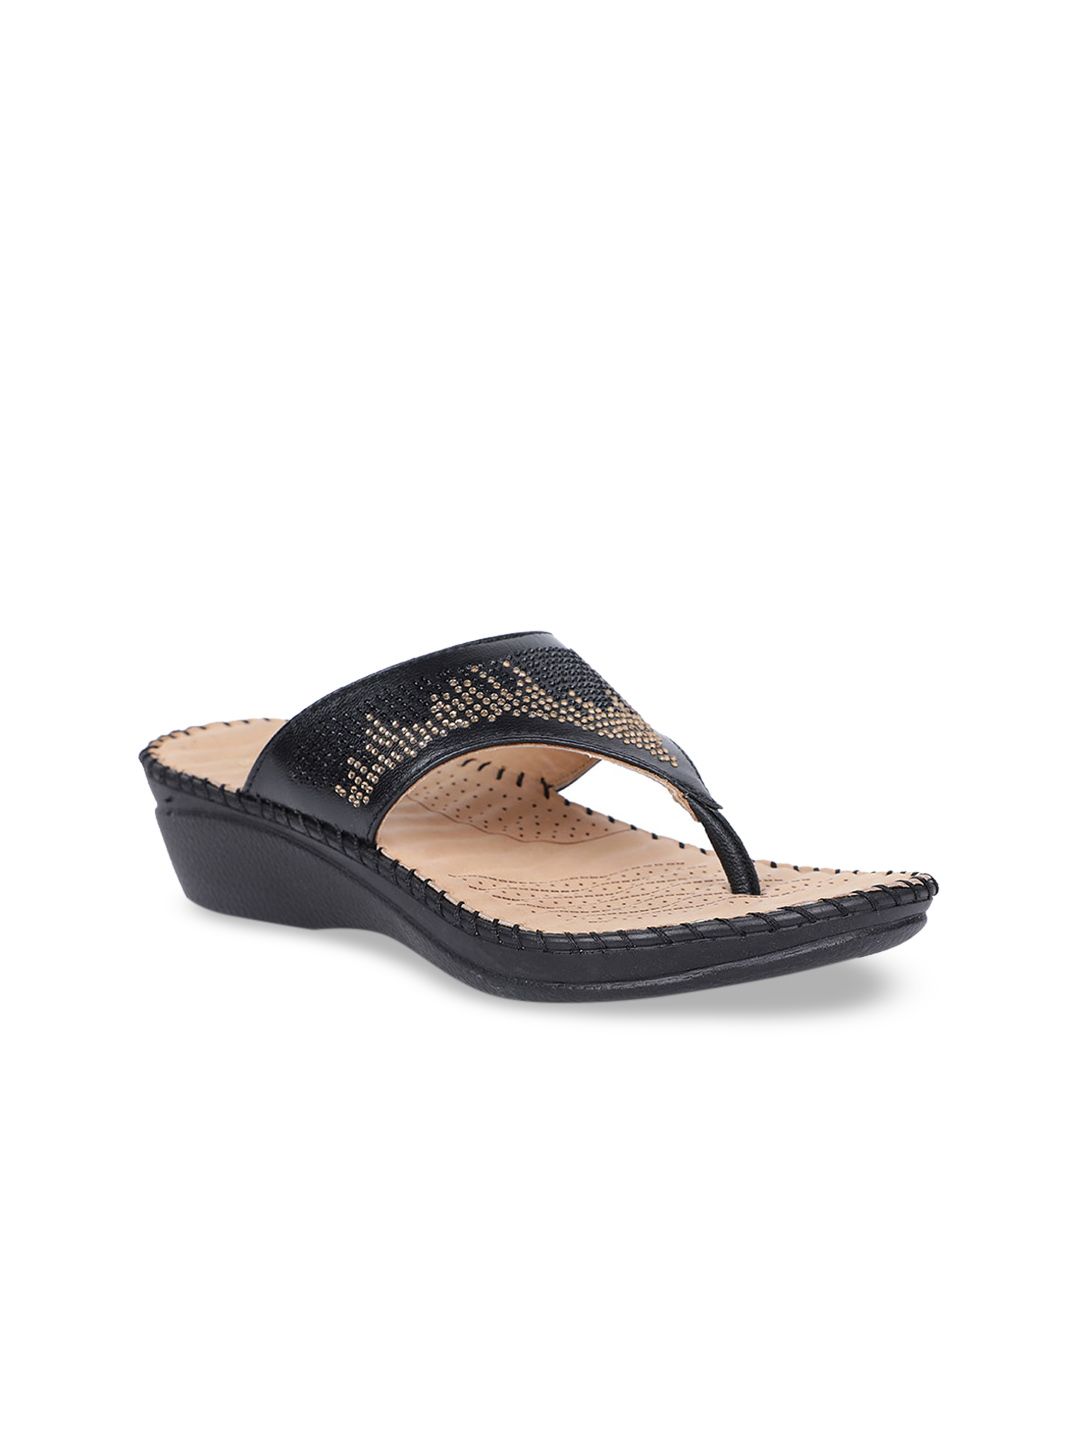 Scholl Women Black Embellished Sandals Price in India